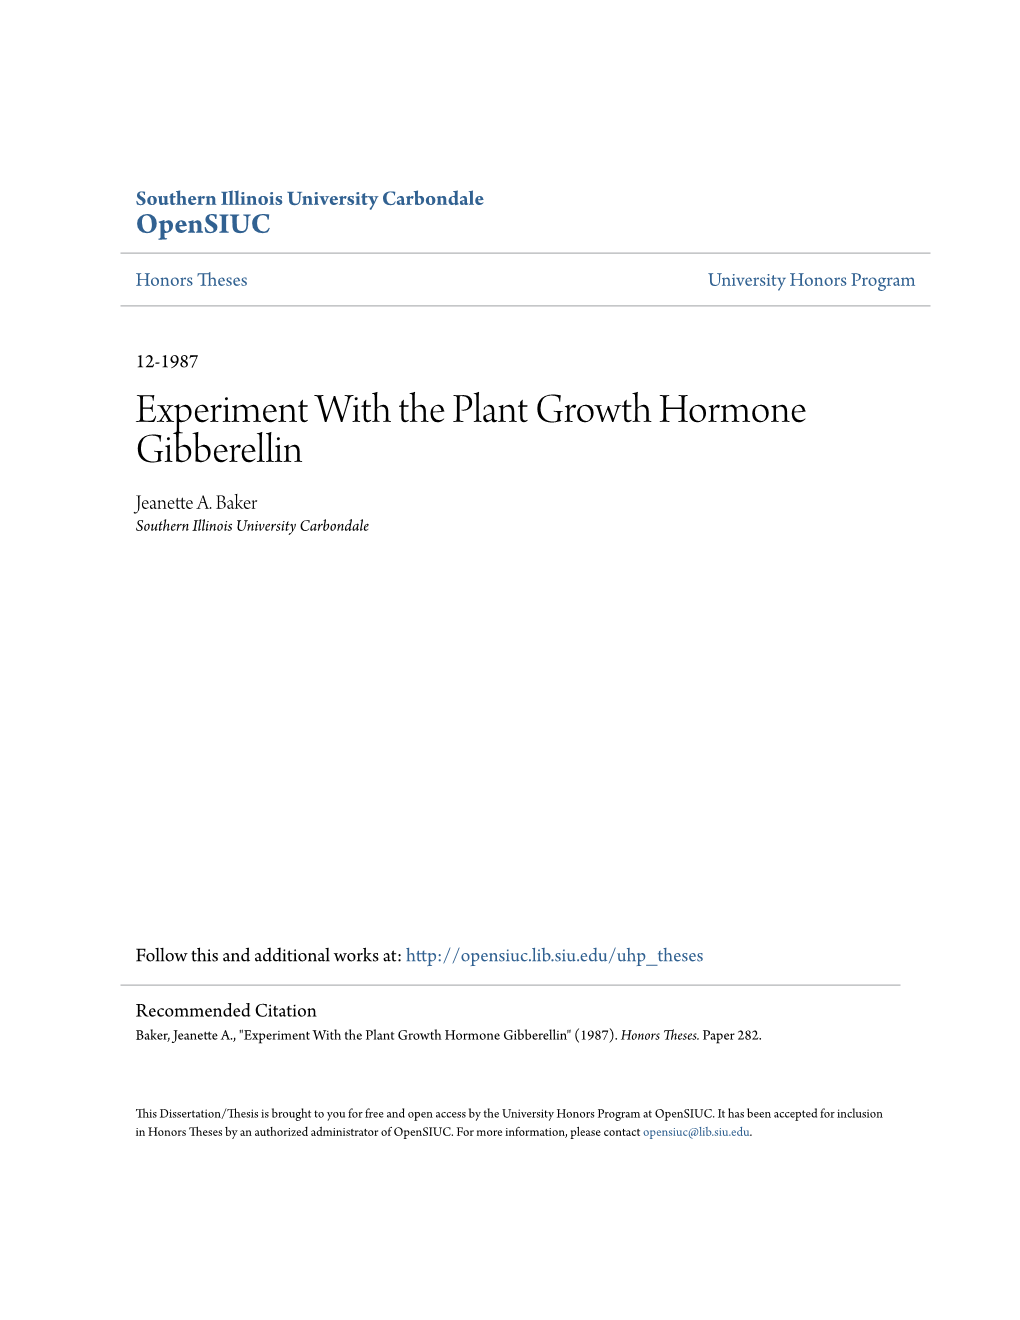 Experiment with the Plant Growth Hormone Gibberellin Jeanette A